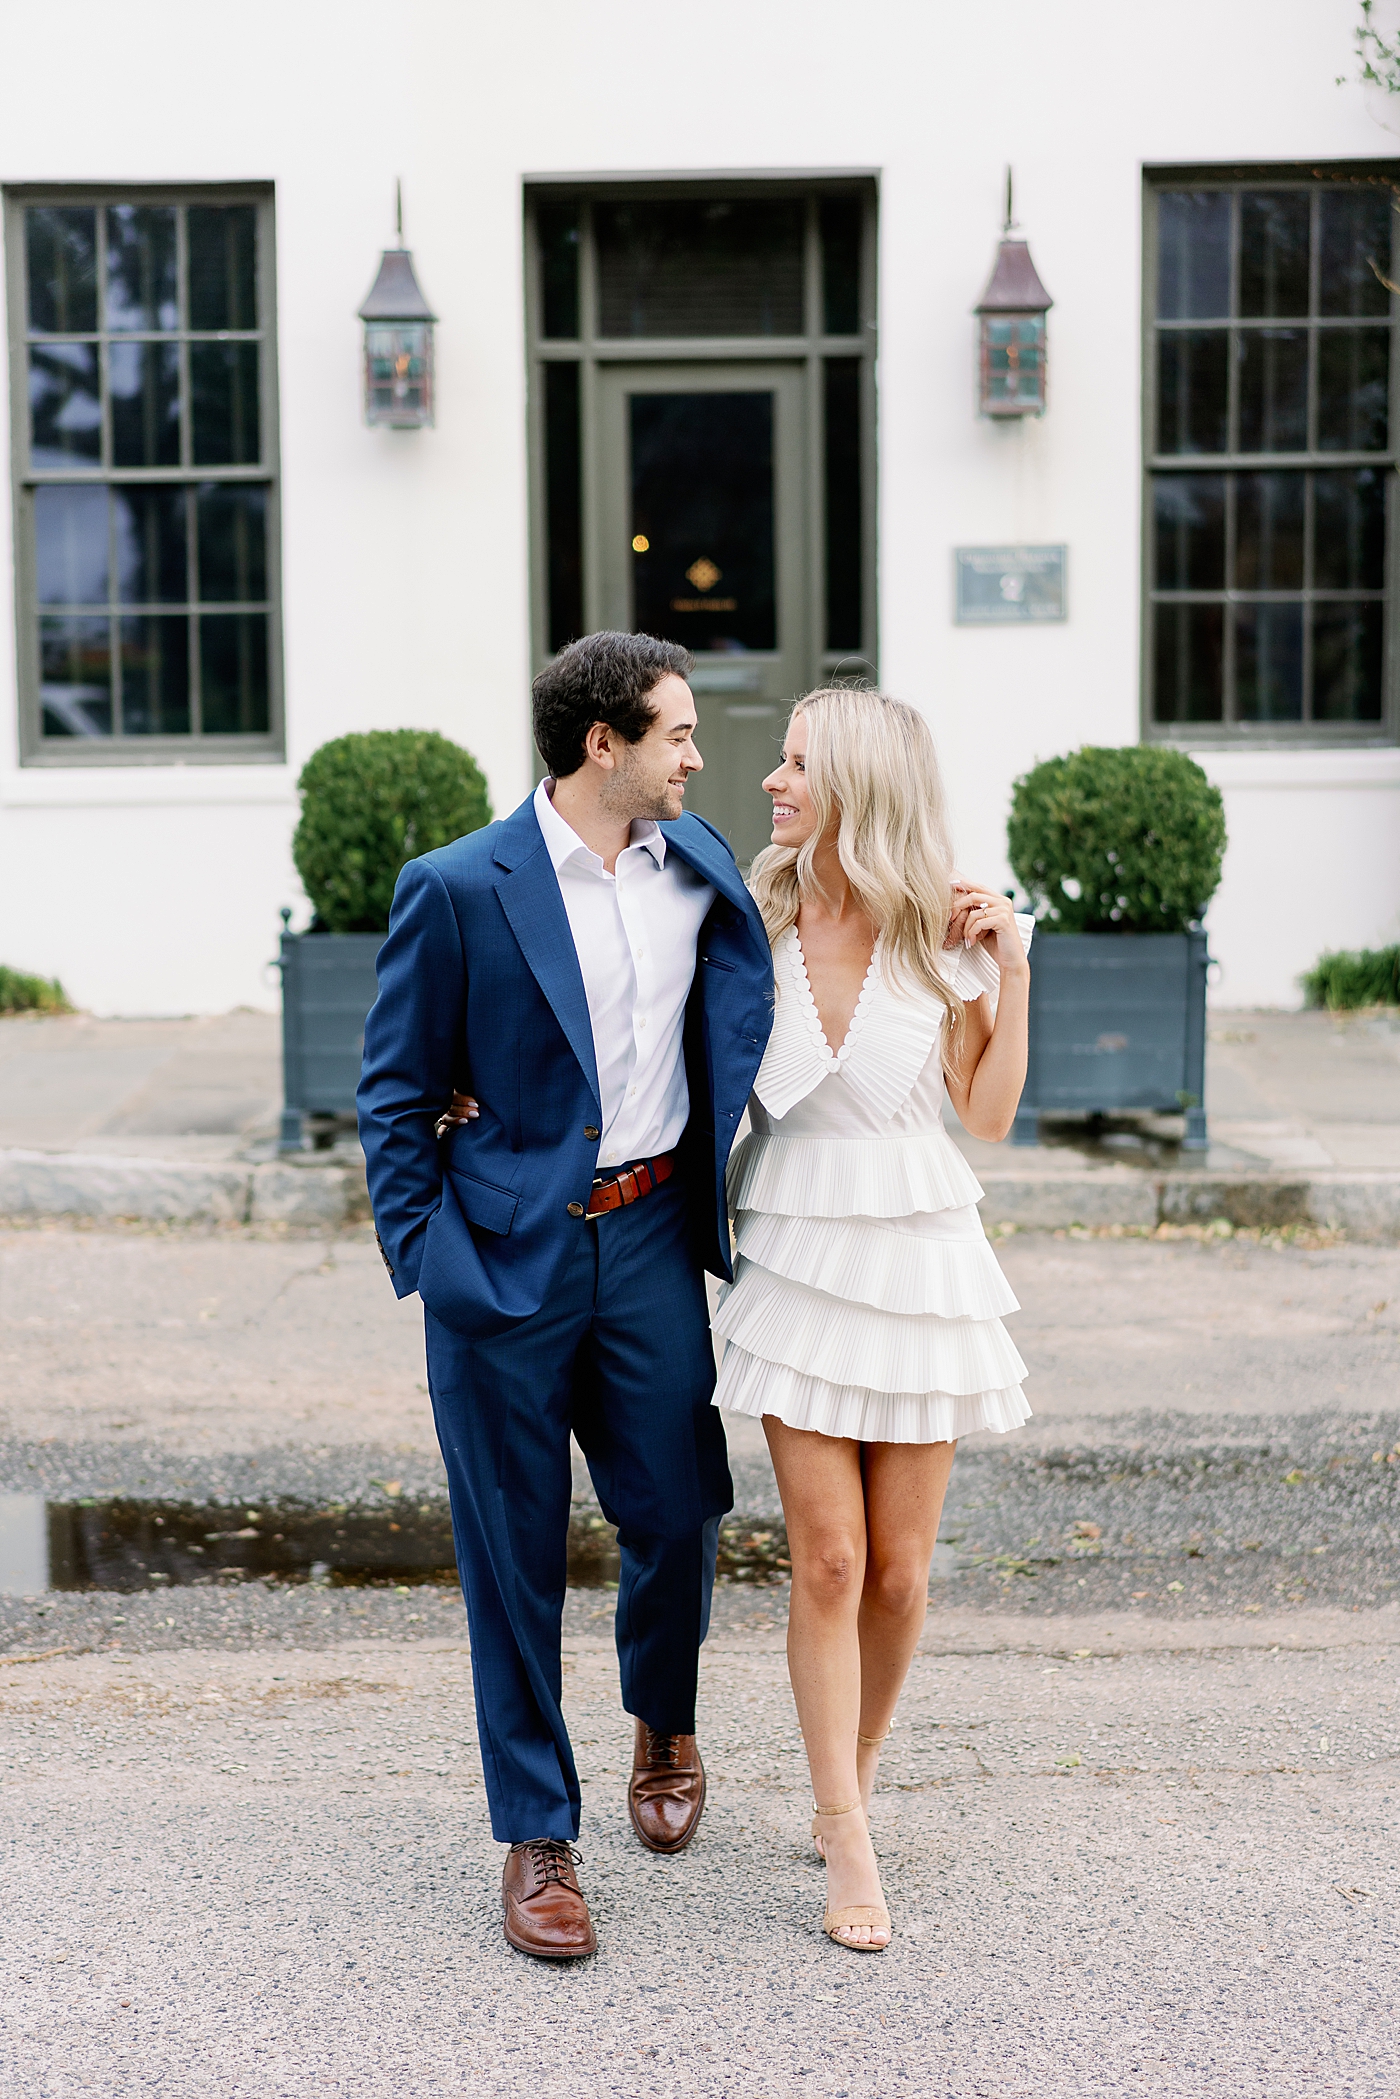 Couple smiling walking in front of white building | Image by Annie Laura Photo